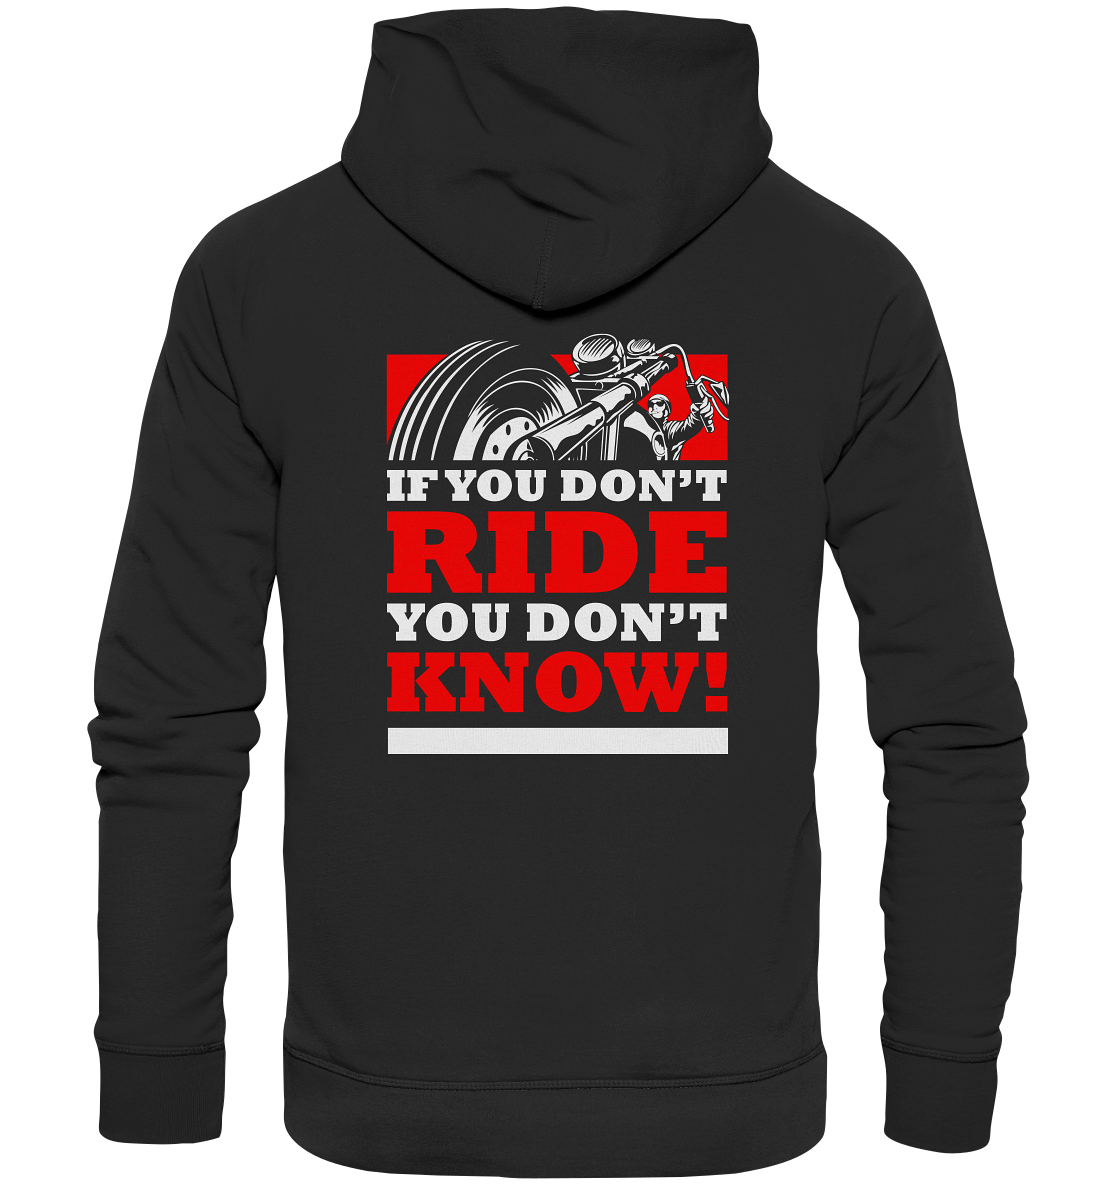 If you don't ride... - Premium Unisex Hoodie